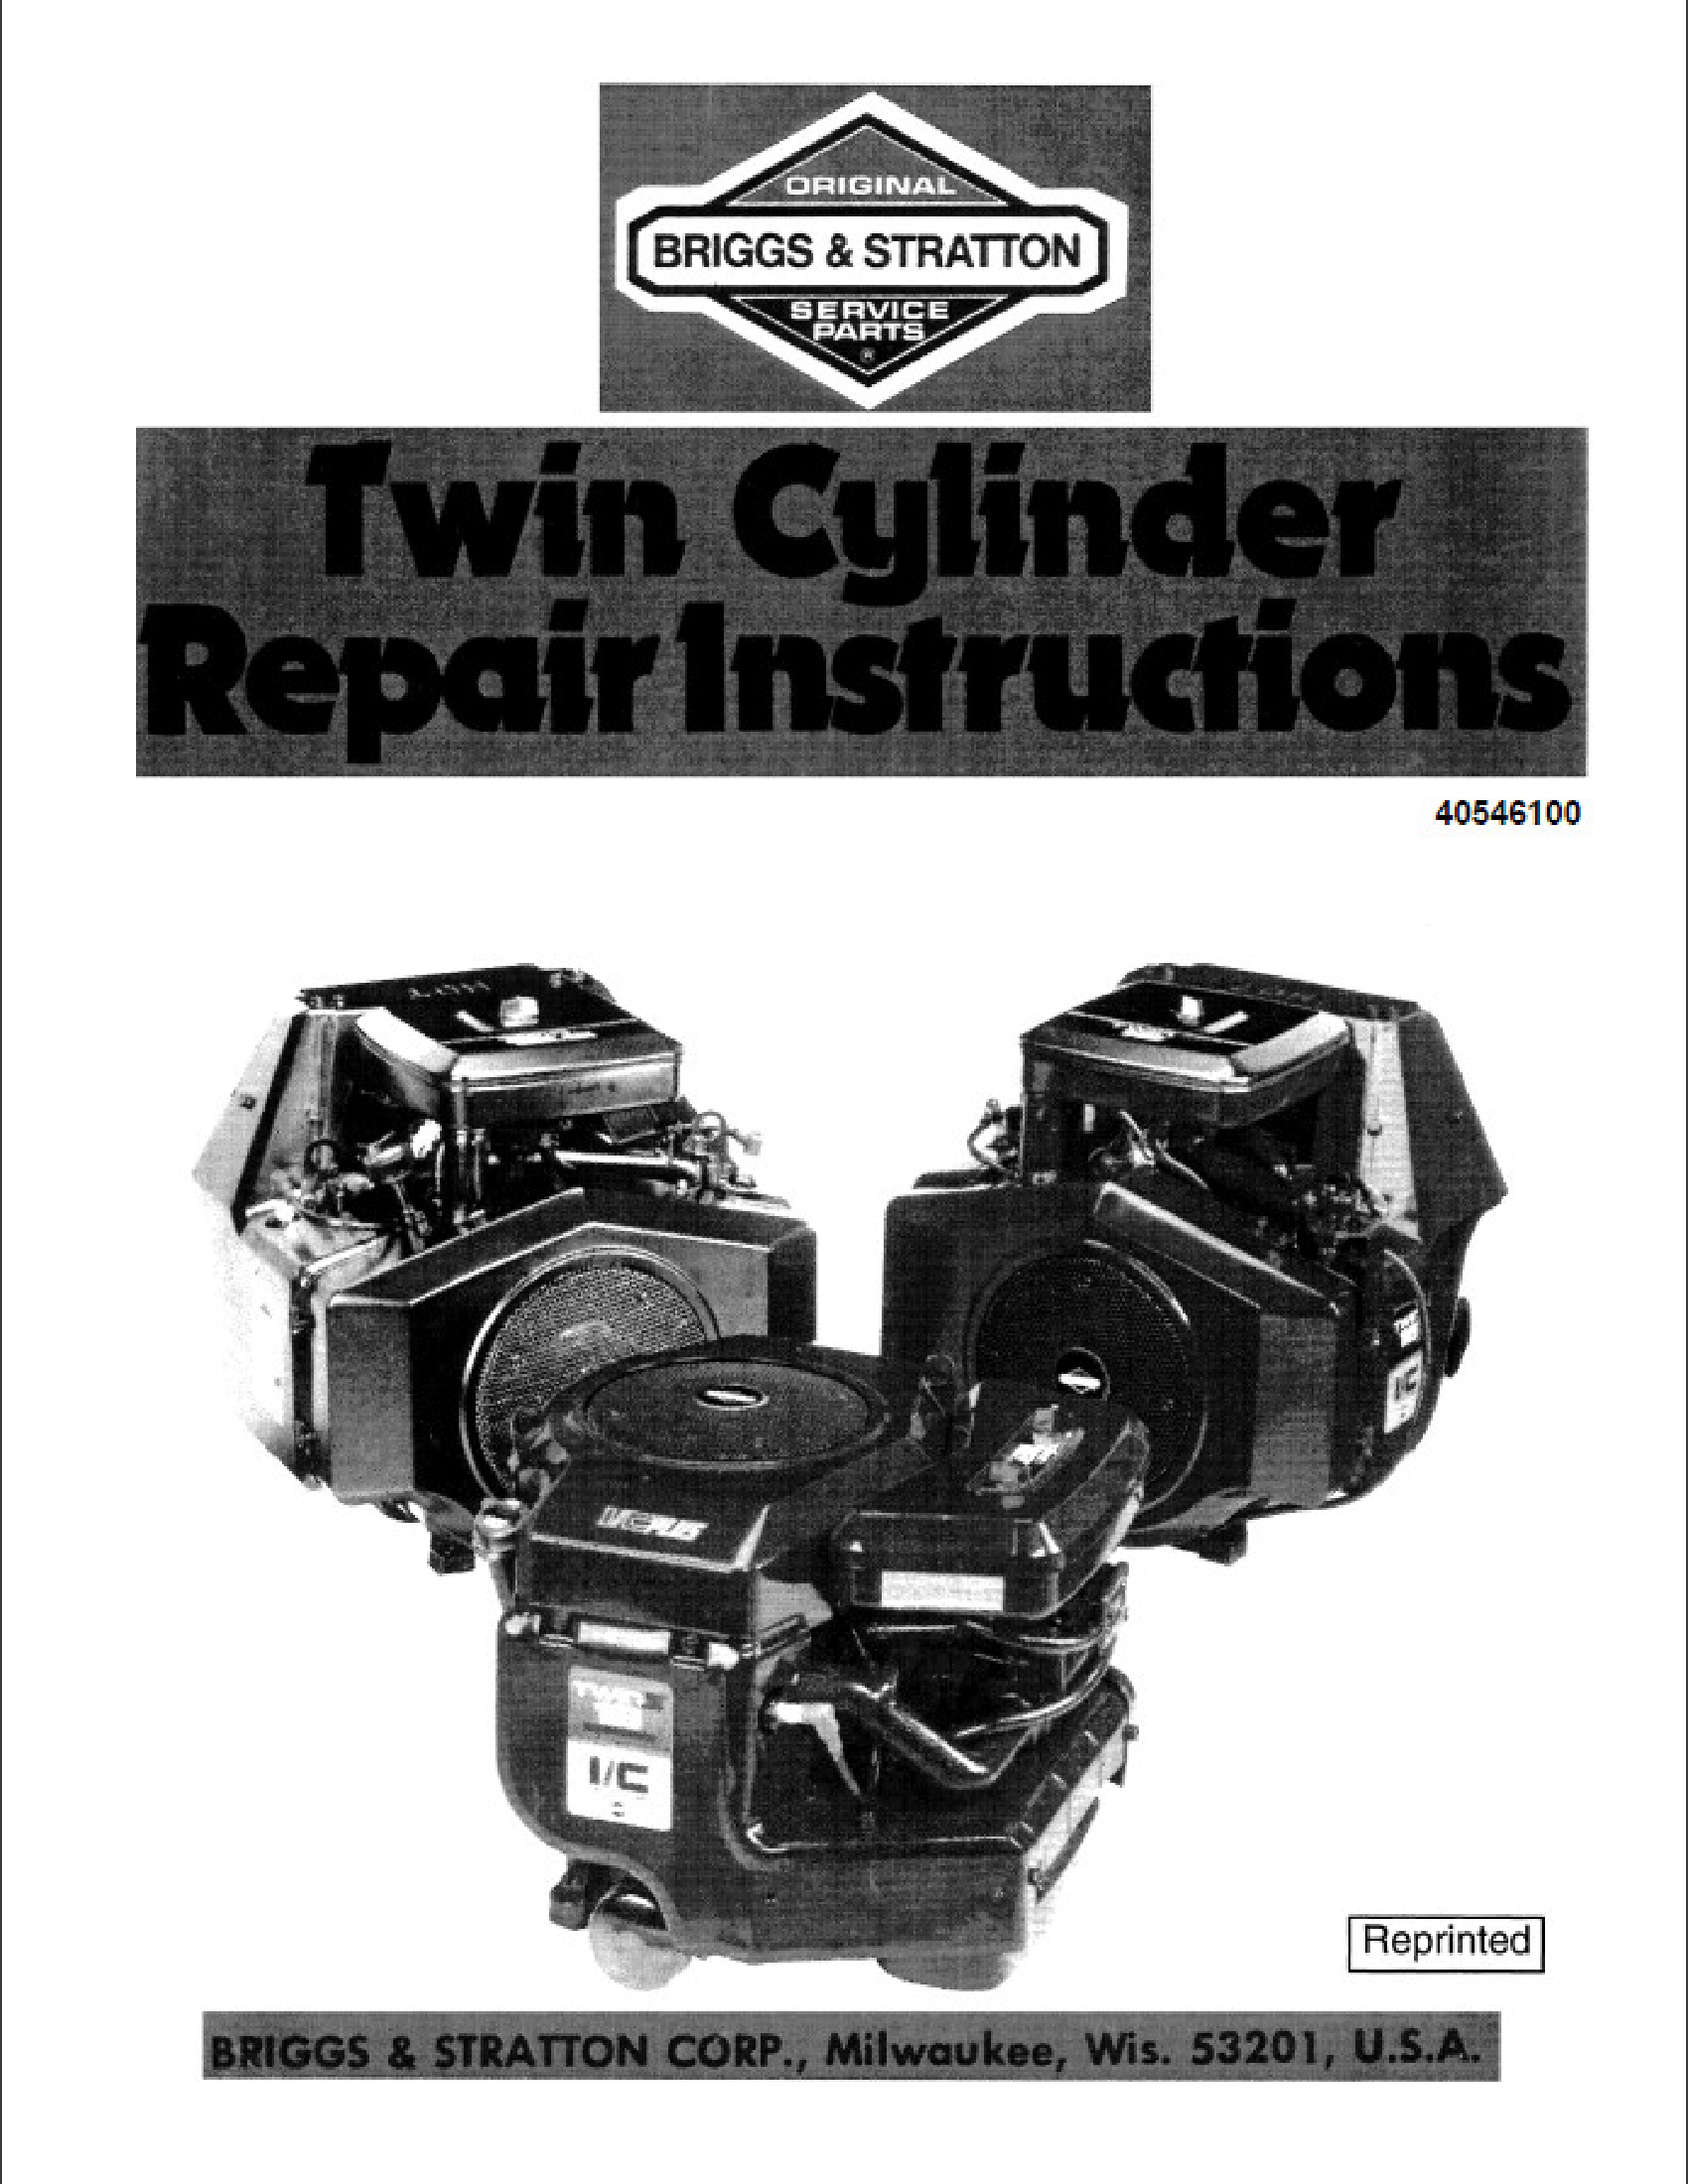 BRIGGS & STRATTON Twin Cylinder Repair Instructions manual